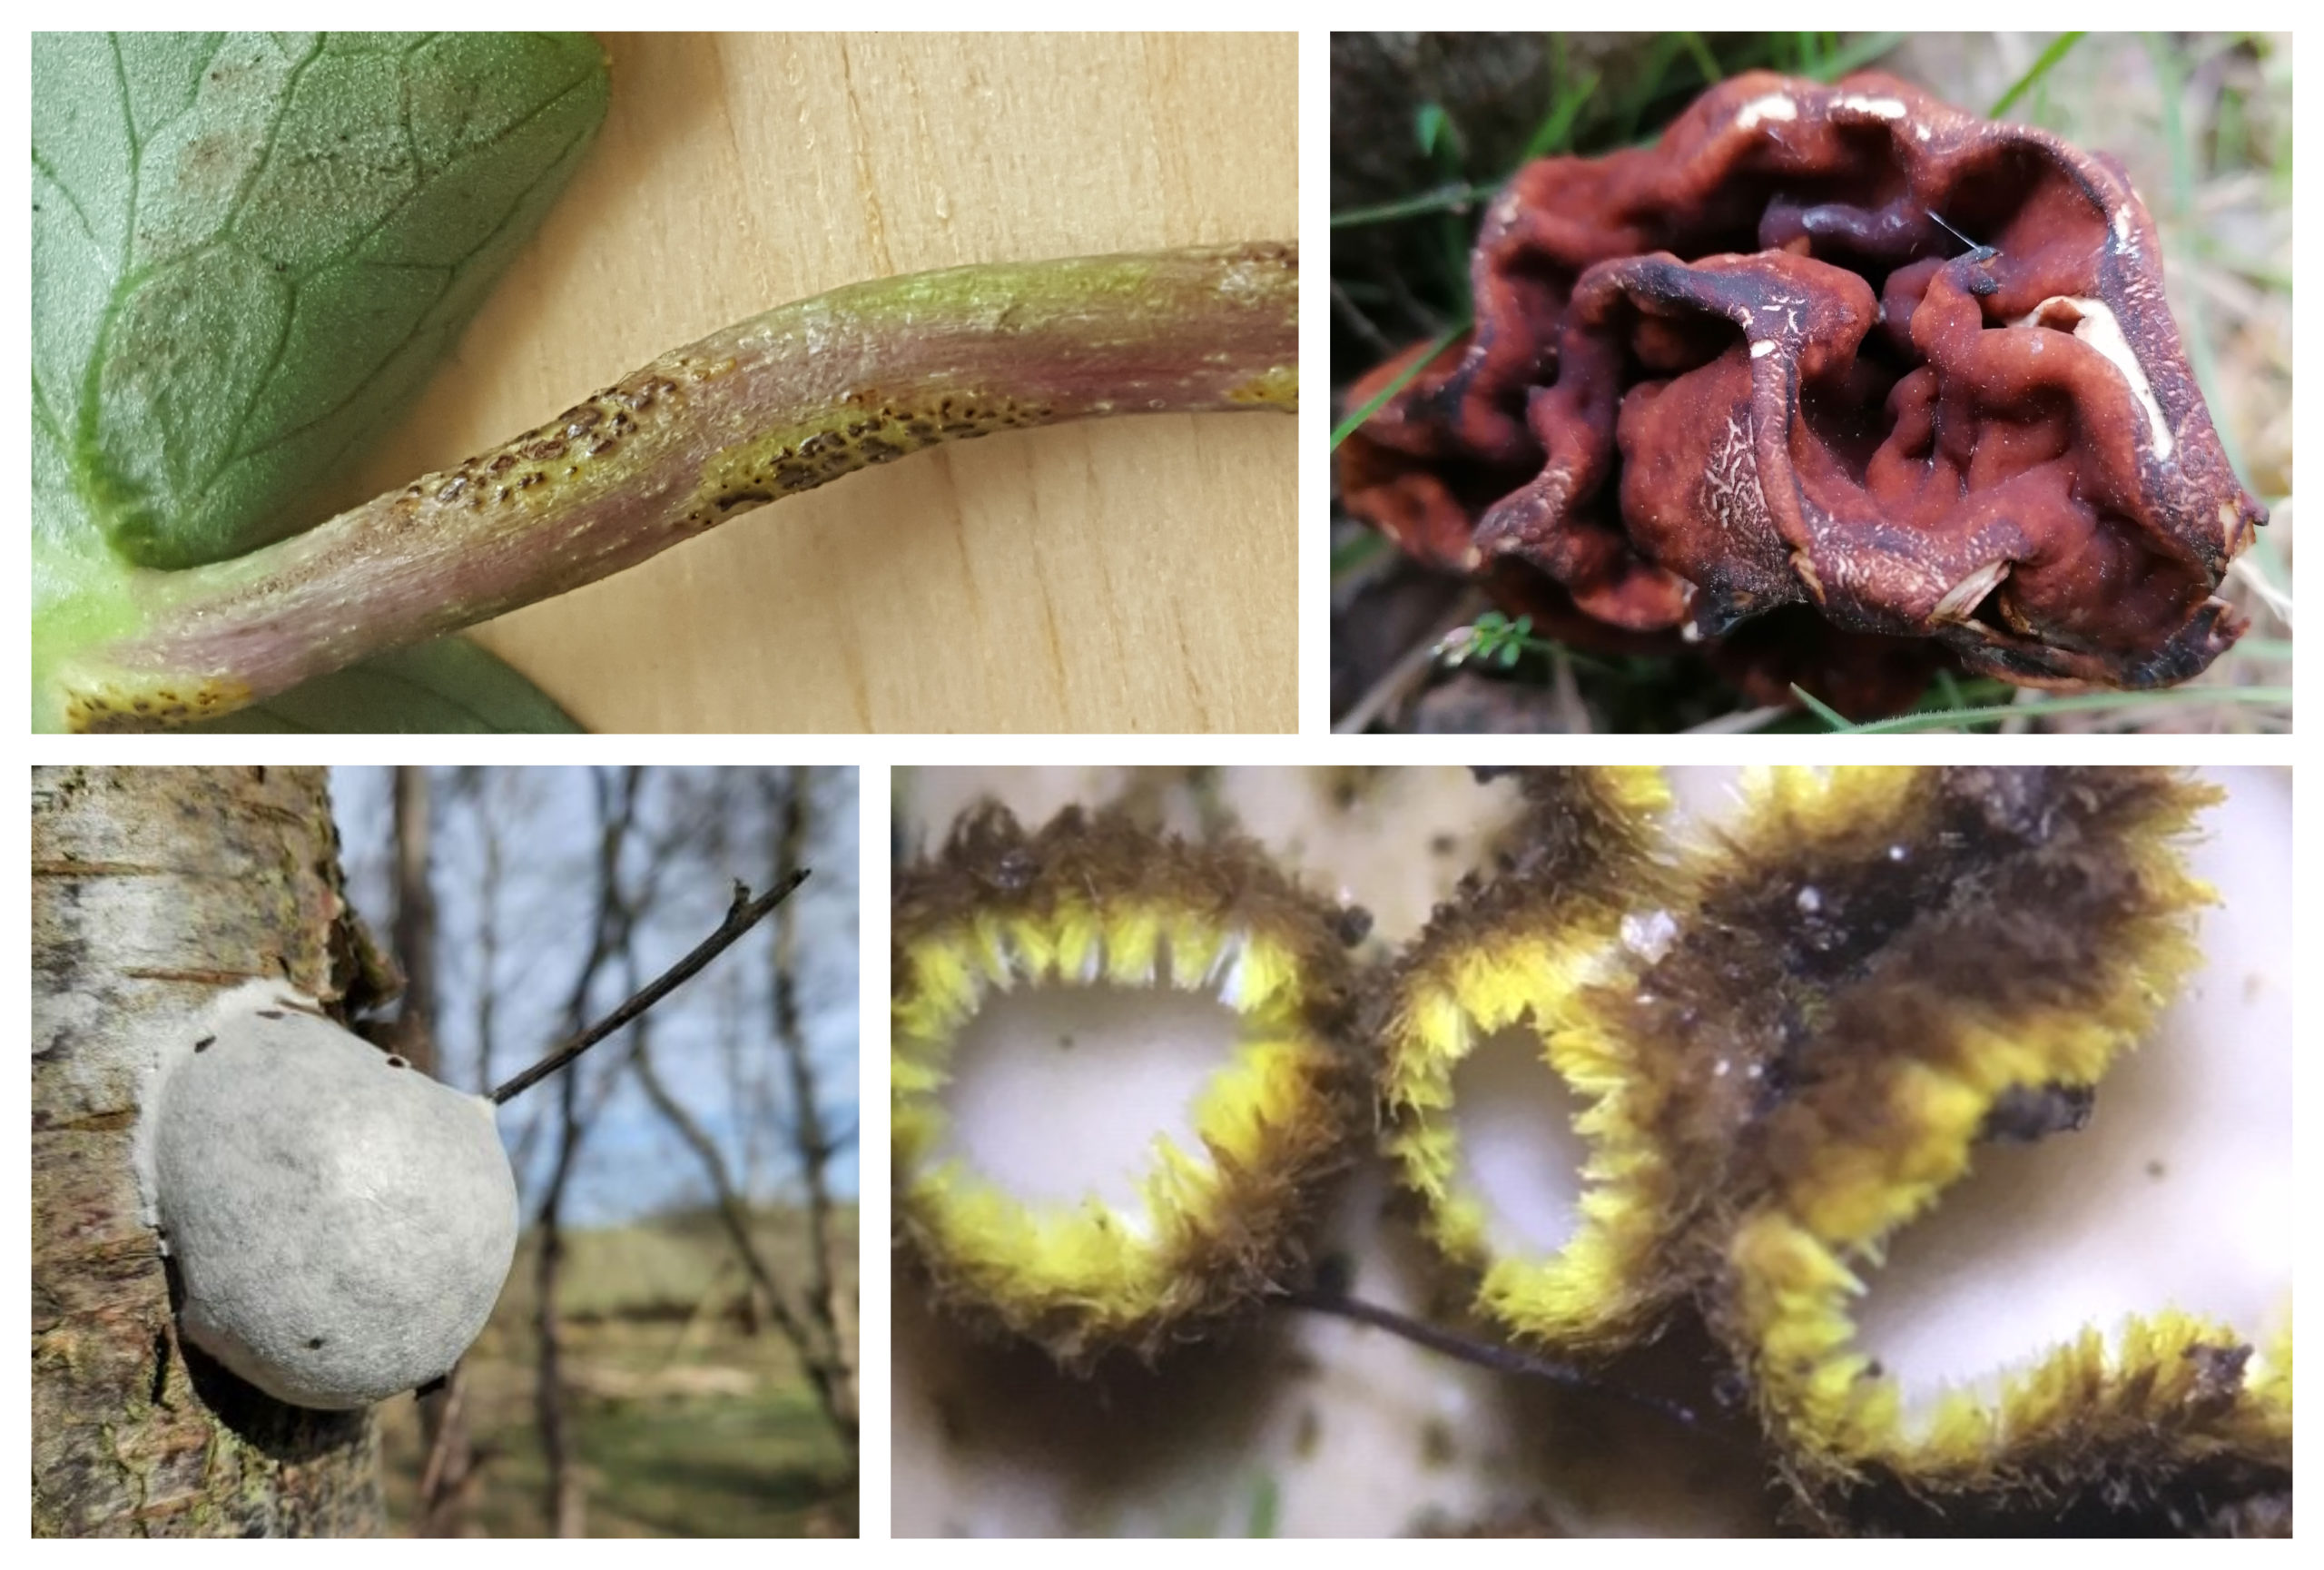 Some of the fungus group's photographed finds. From top left, clockwise: bitter chocolate rust by Helen Baker, false morel by James Robinson, trichopeziza mollissima by Toni Watt, and moon poo by Duncan Cowper